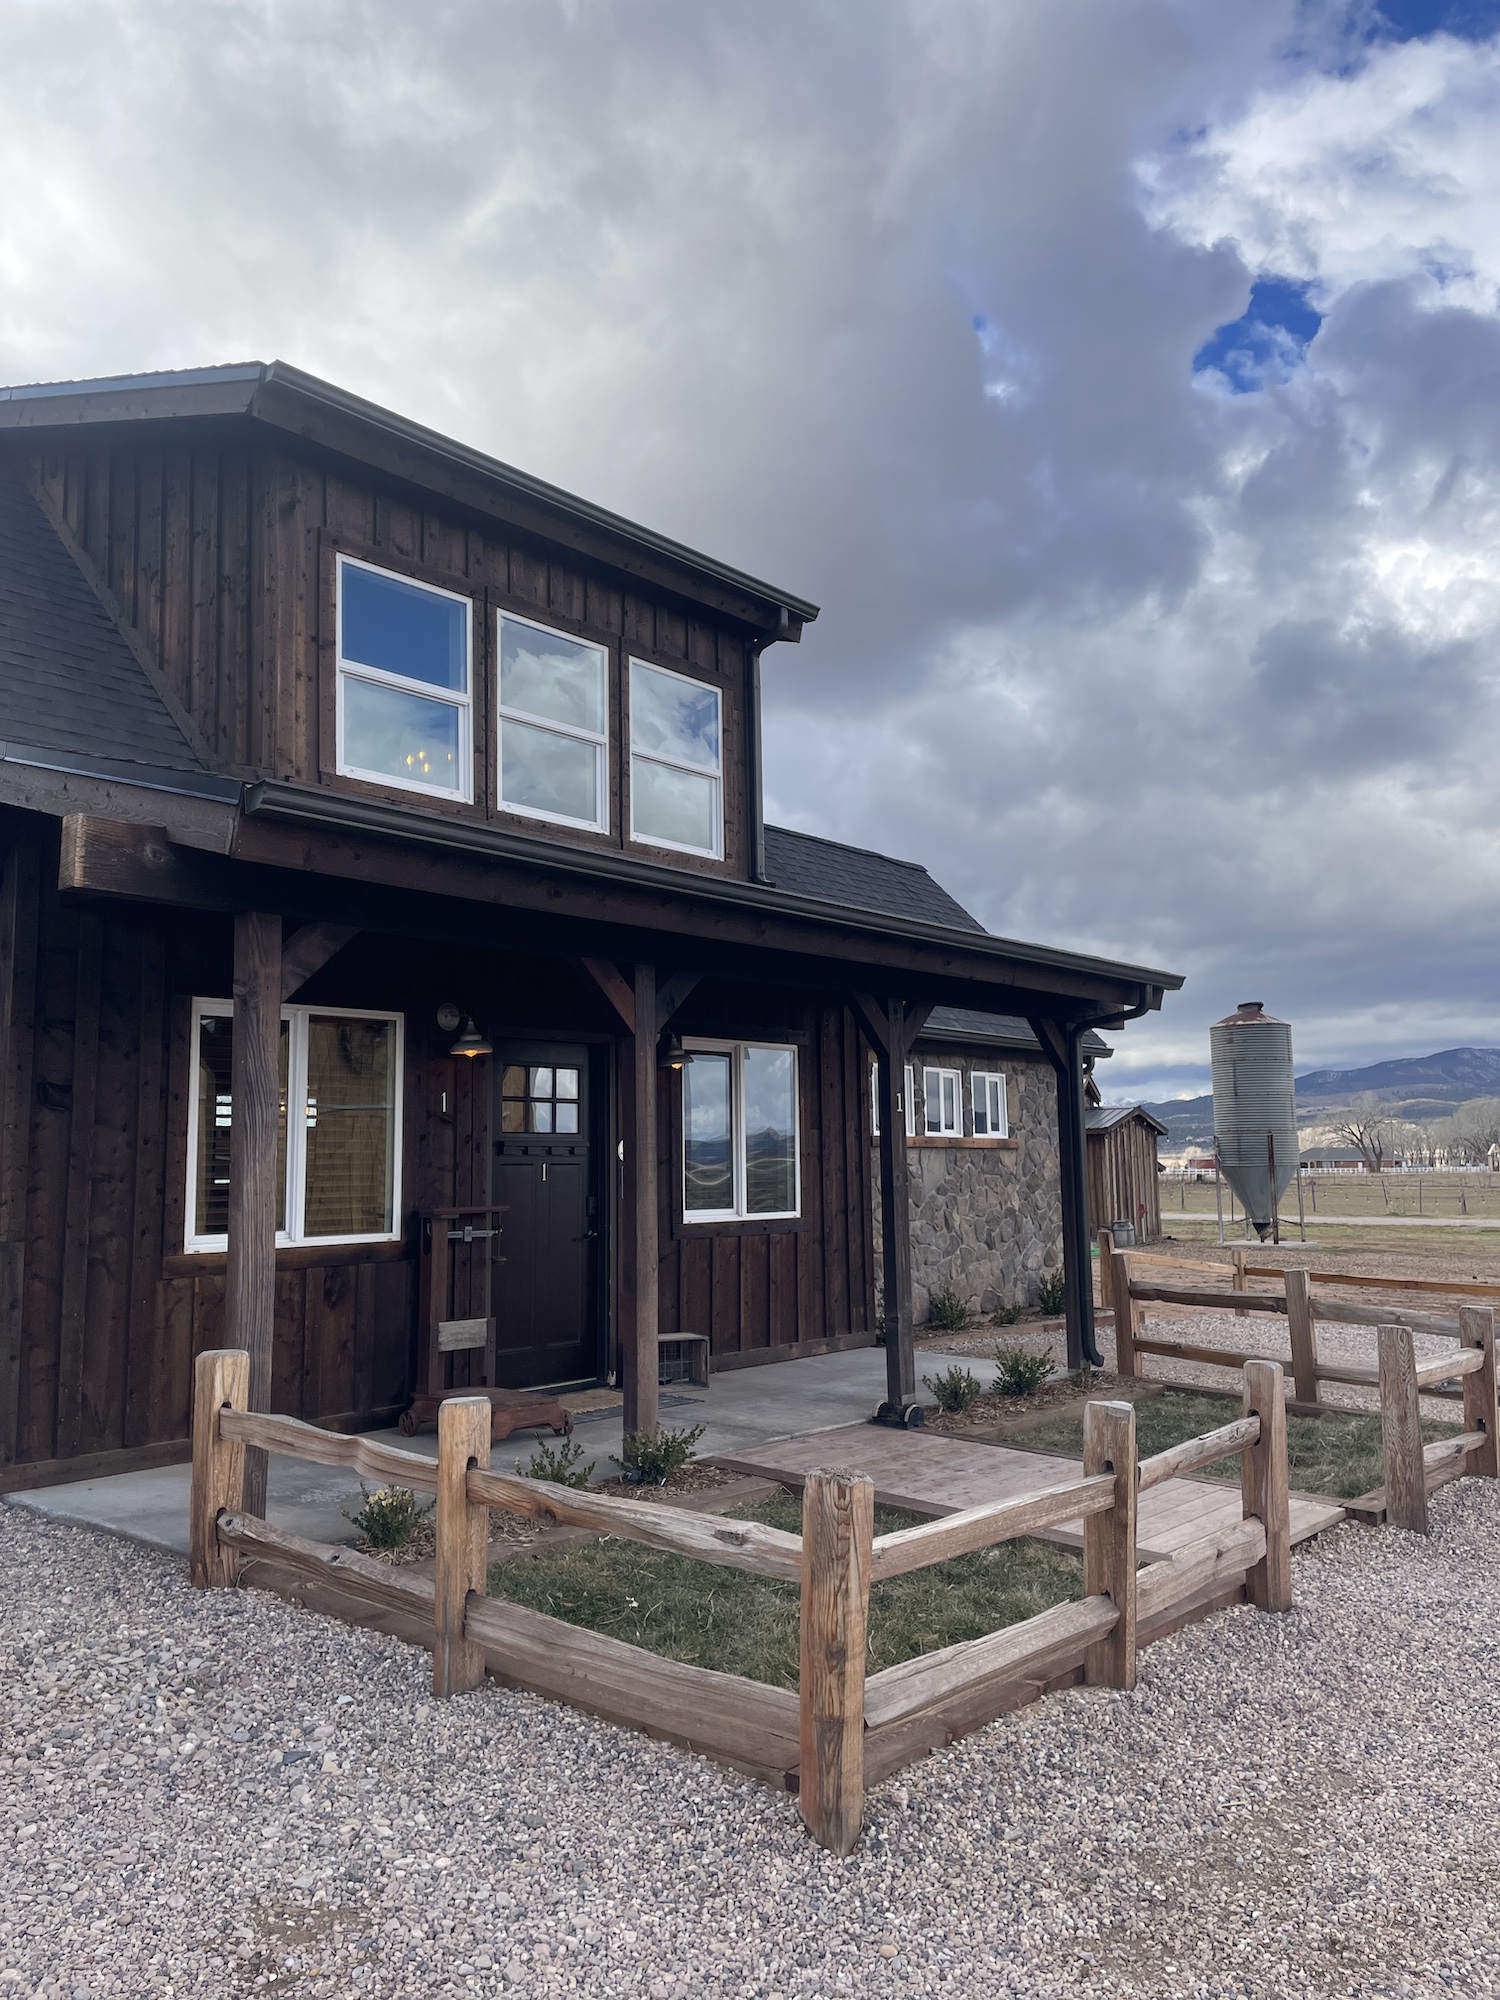 Southern utah farm stay with mini animals guest home